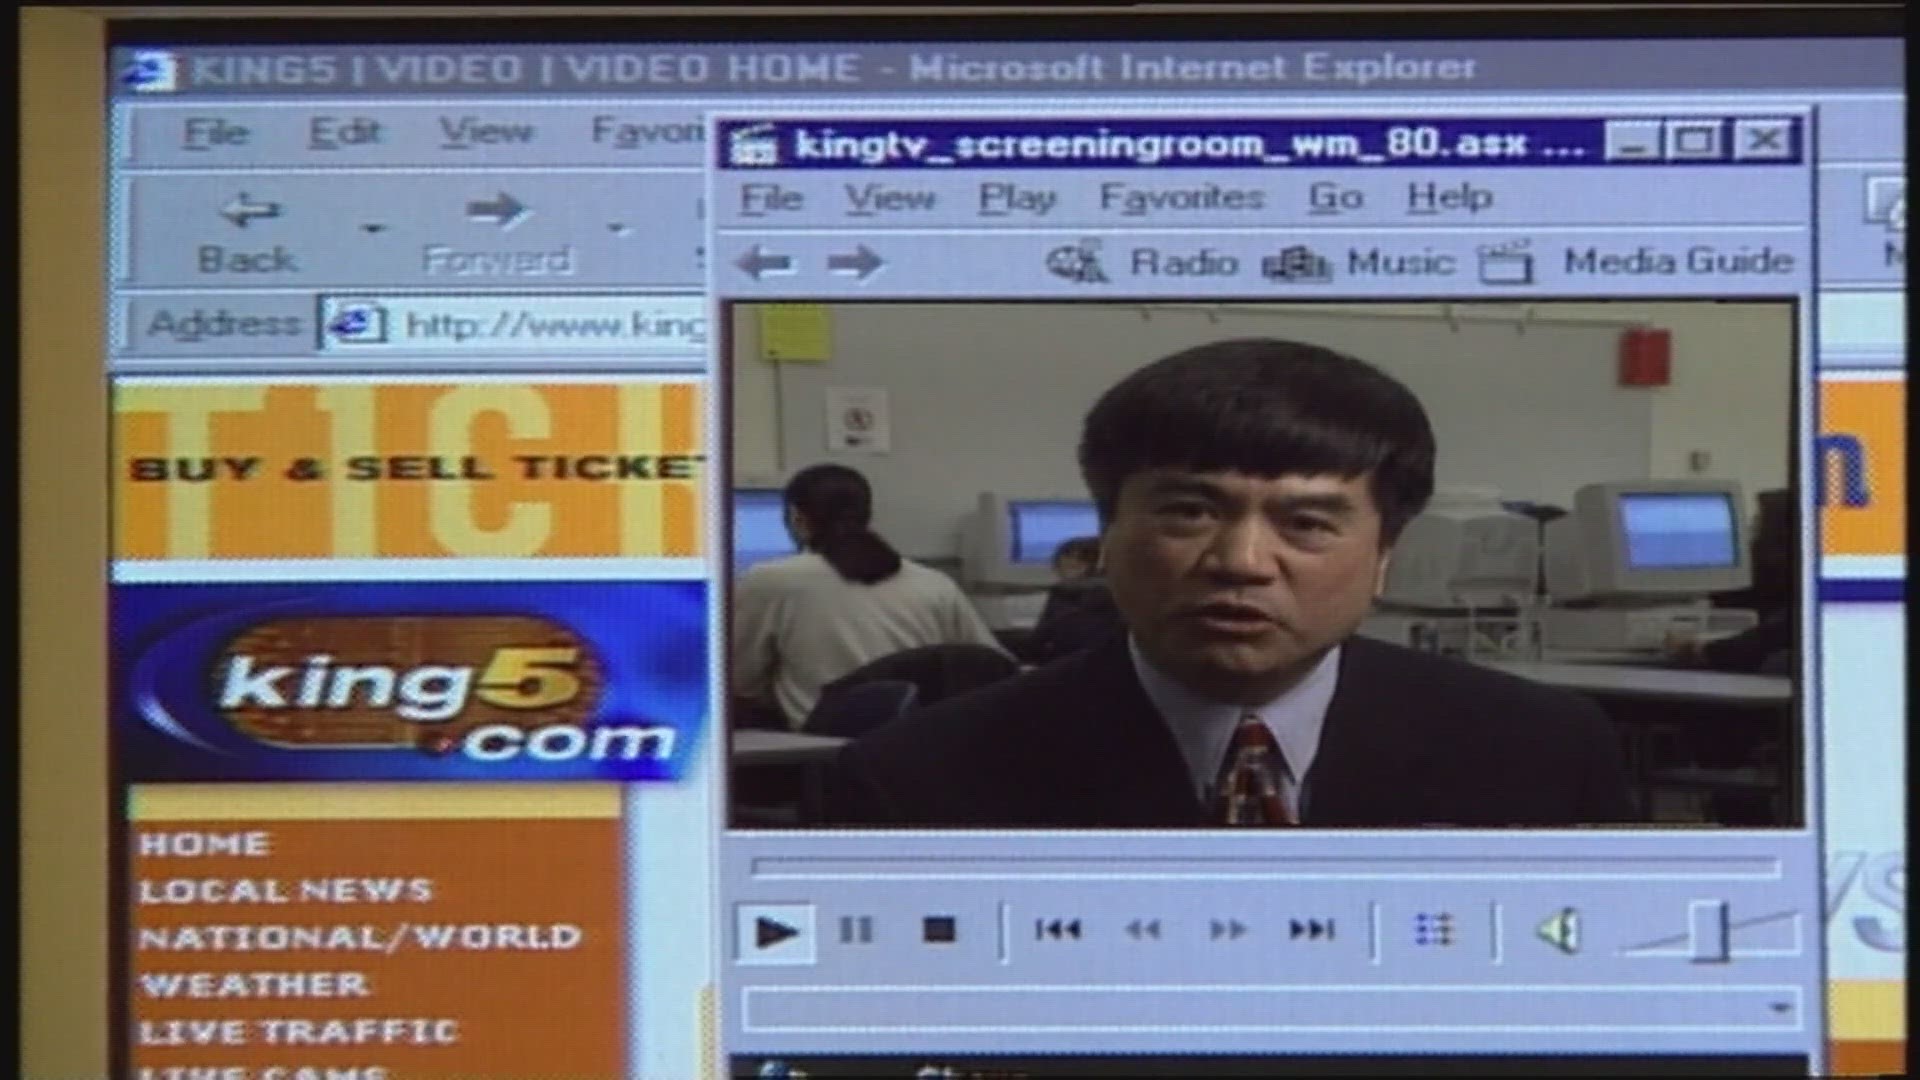 As NWCN was just launching, KING 5 was also dabbling in the online world.